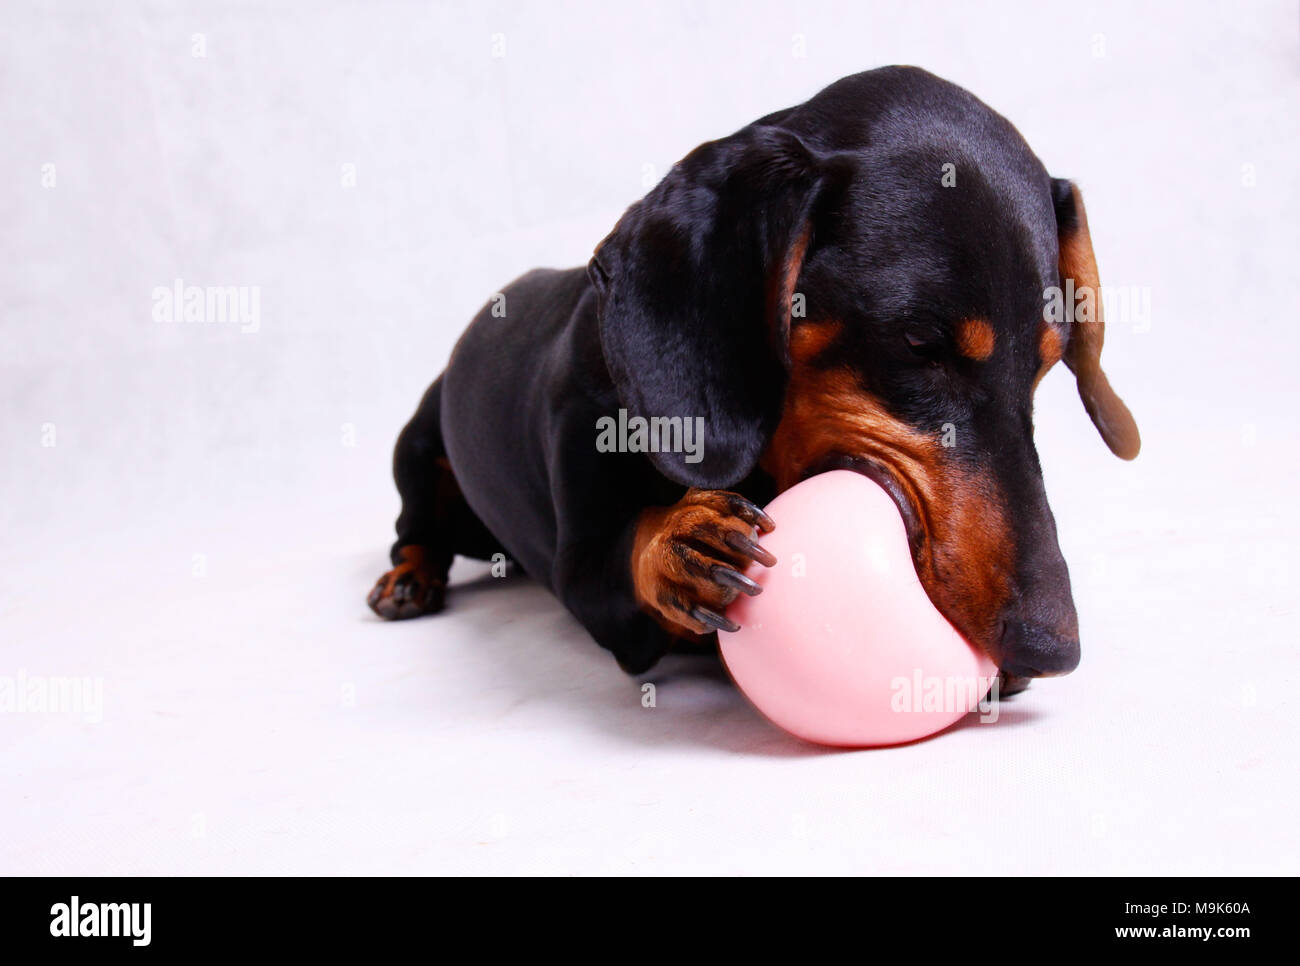 Dog playing with a Pink ball Stock Photo